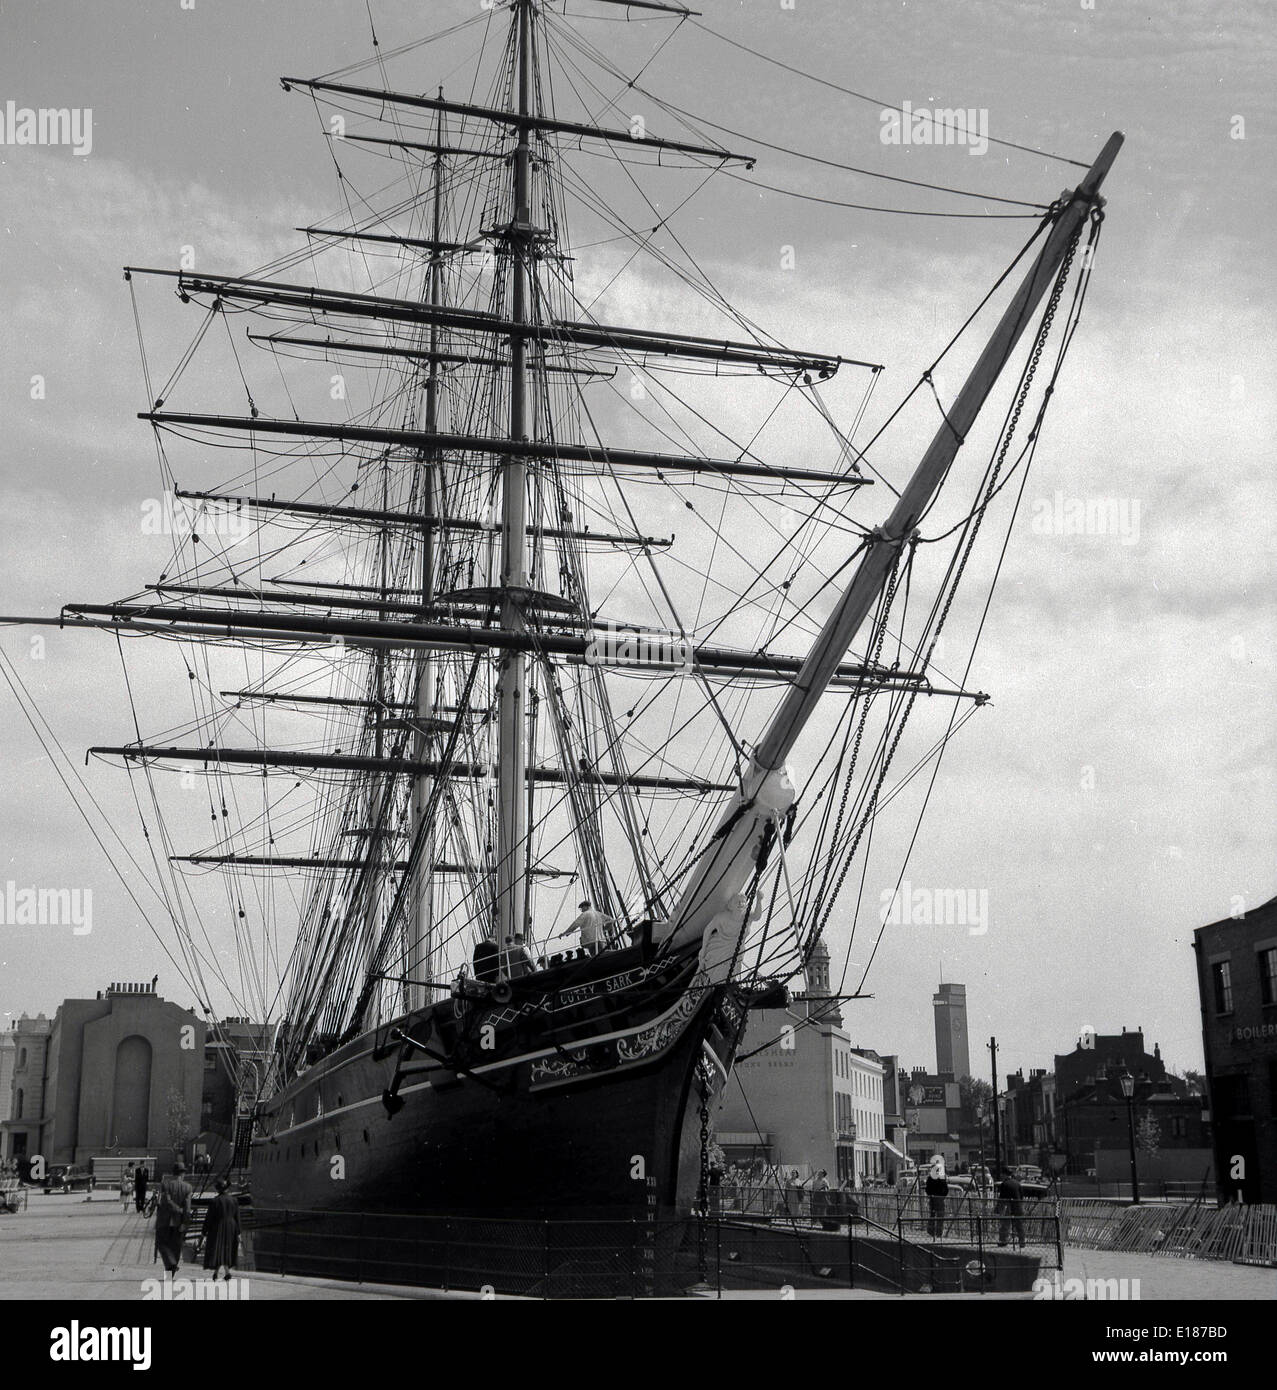 1950s historical picture showing the famous Cutty Sark clipper ship ...